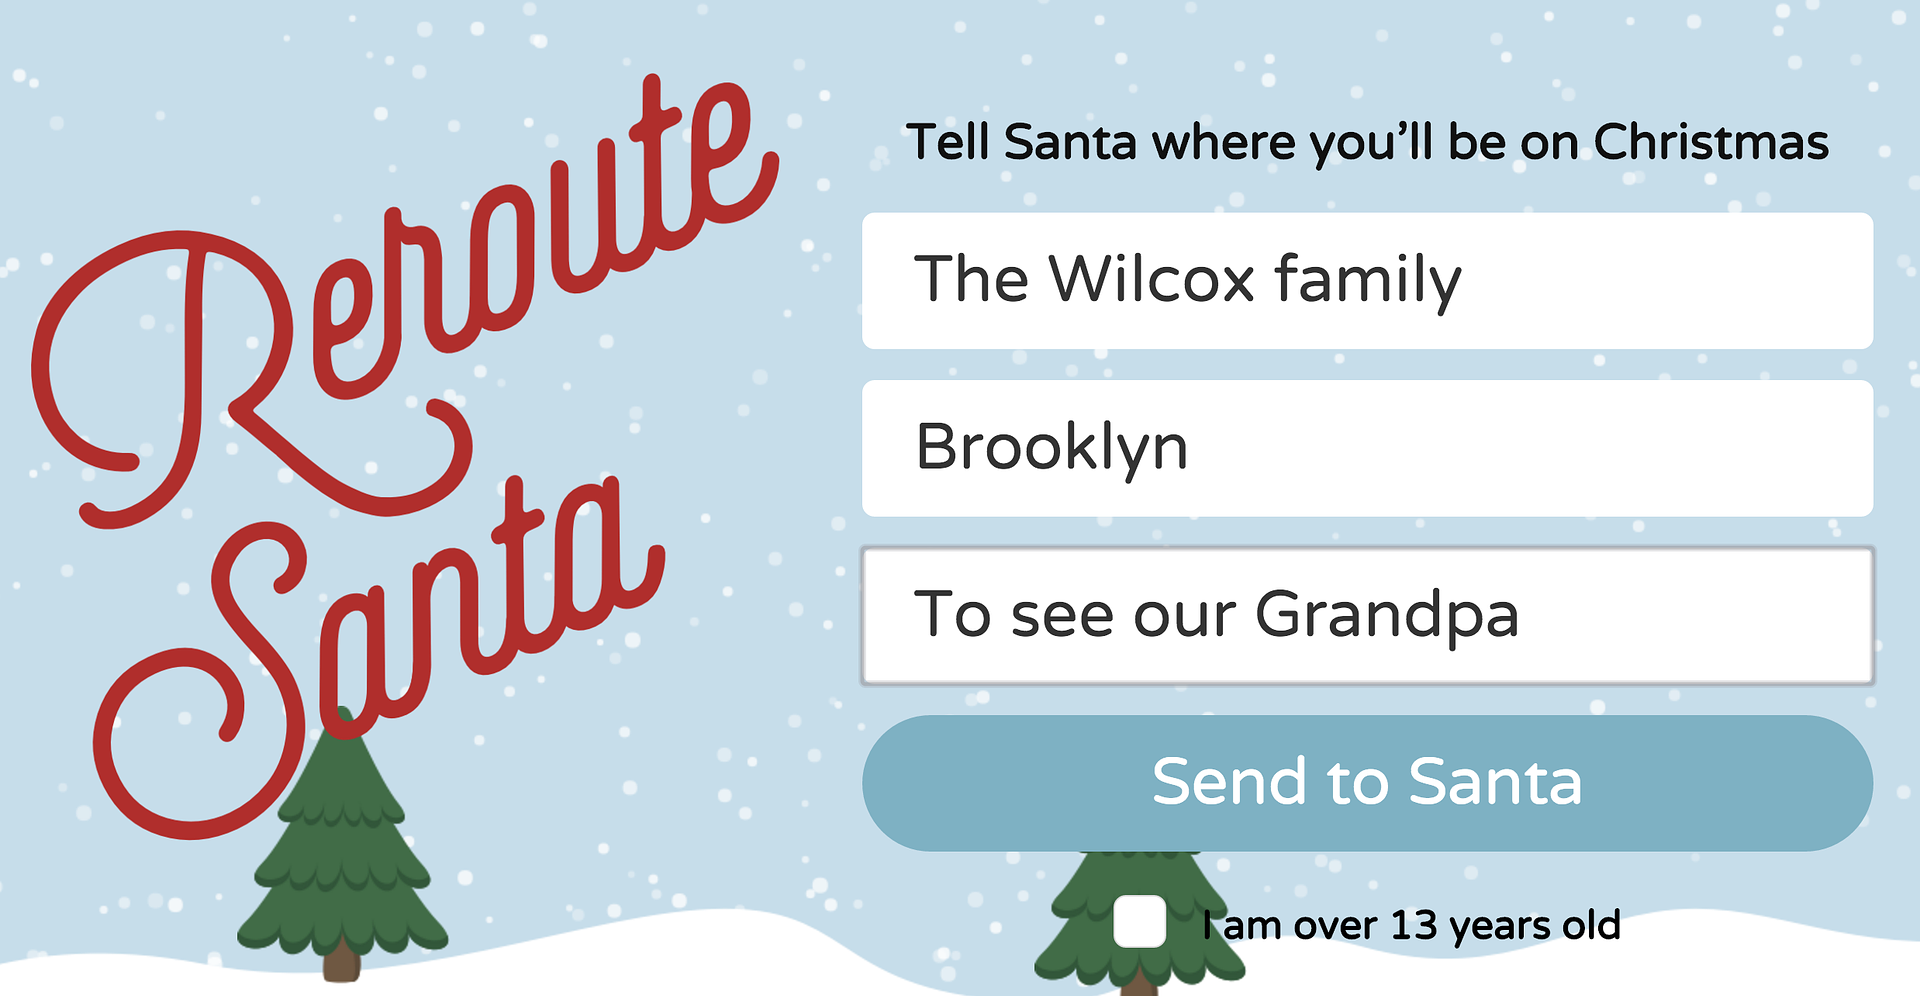 Reroute Santa: Type in your child's name and where you'll be Christmas morning and receive a letter reassuring you that yep, Santa's got your kids covered, even away from home.